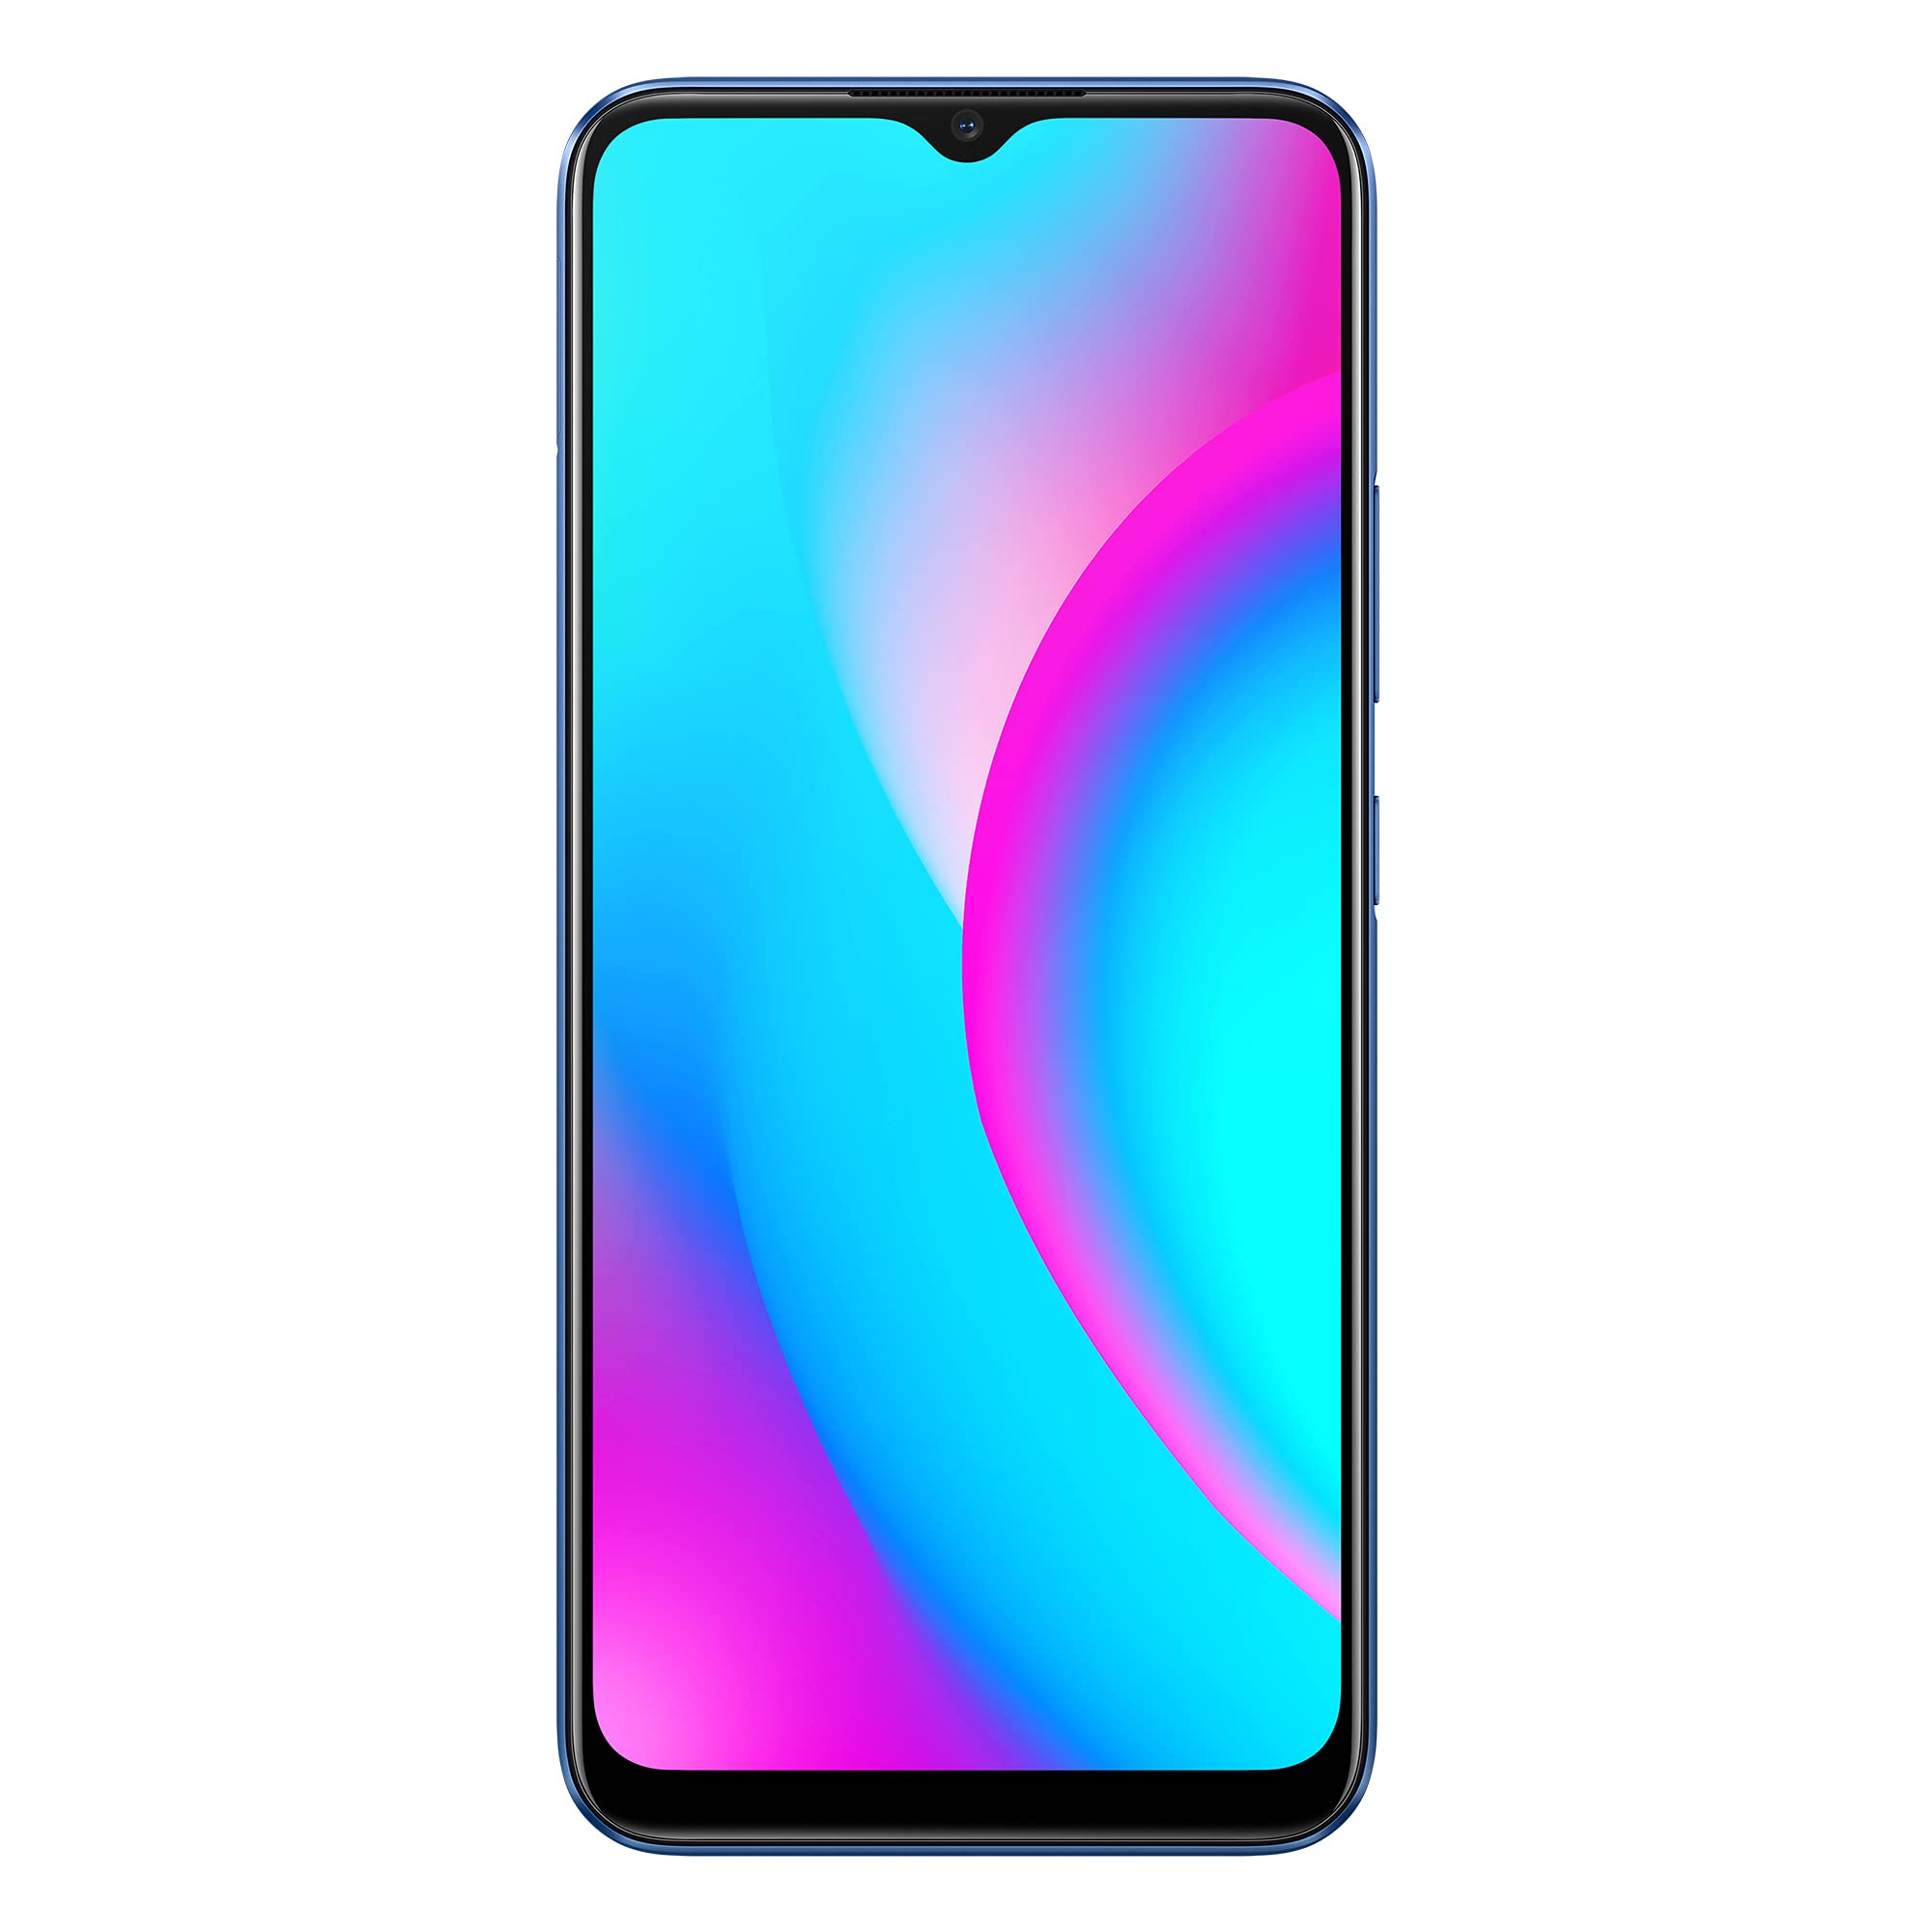 realme-to-launch-phone-with-6000mah-battery-in-indonesia